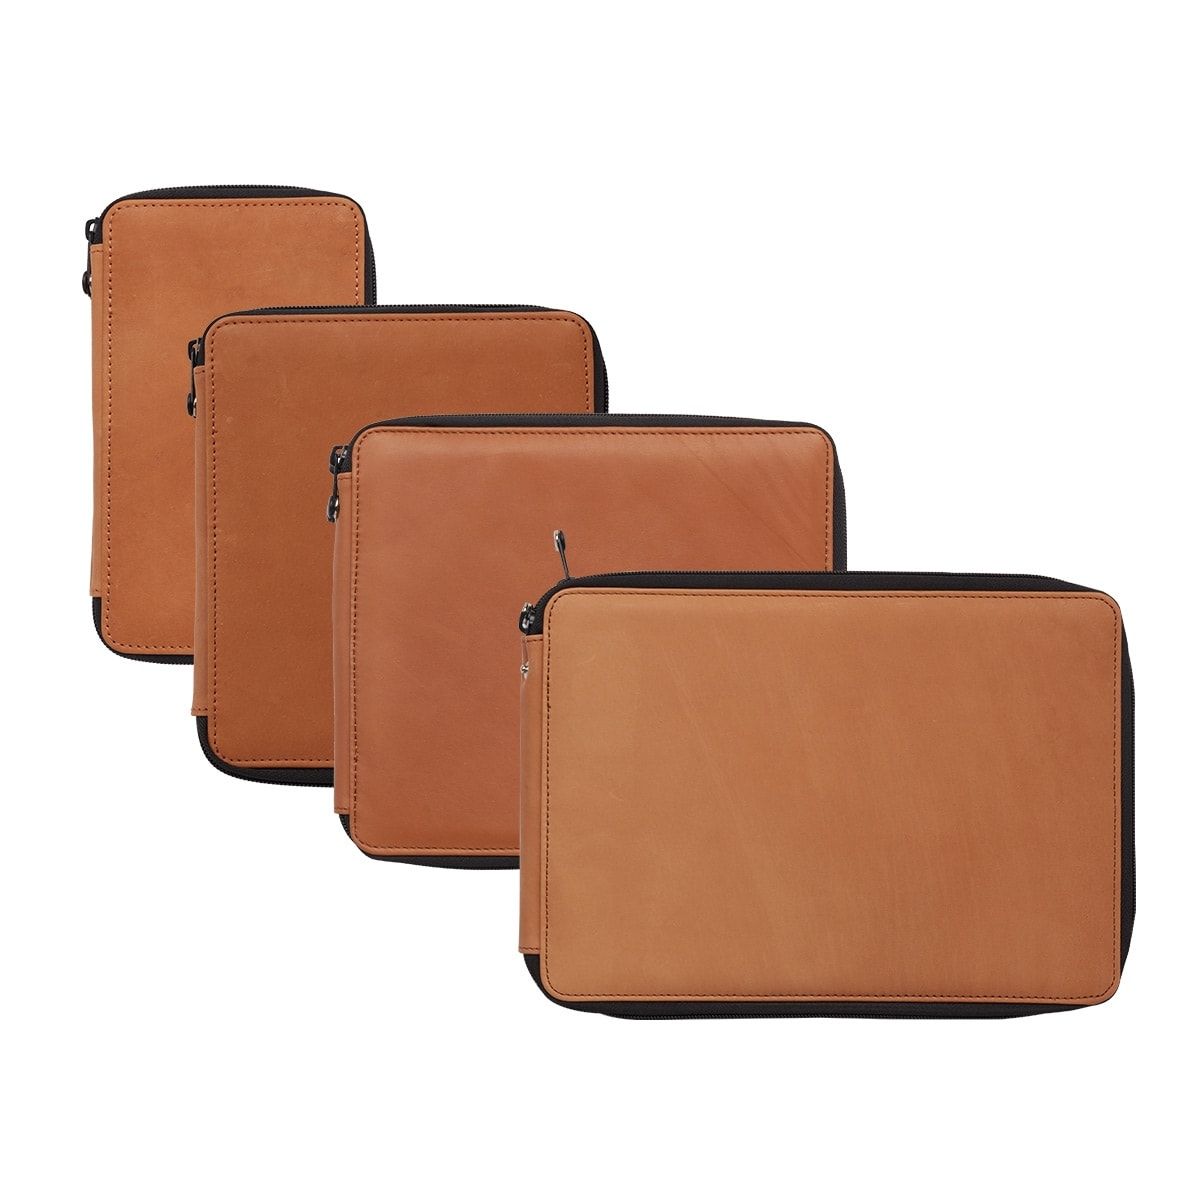 Global Art Genuine Leather Colored Pencil Cases - Brown